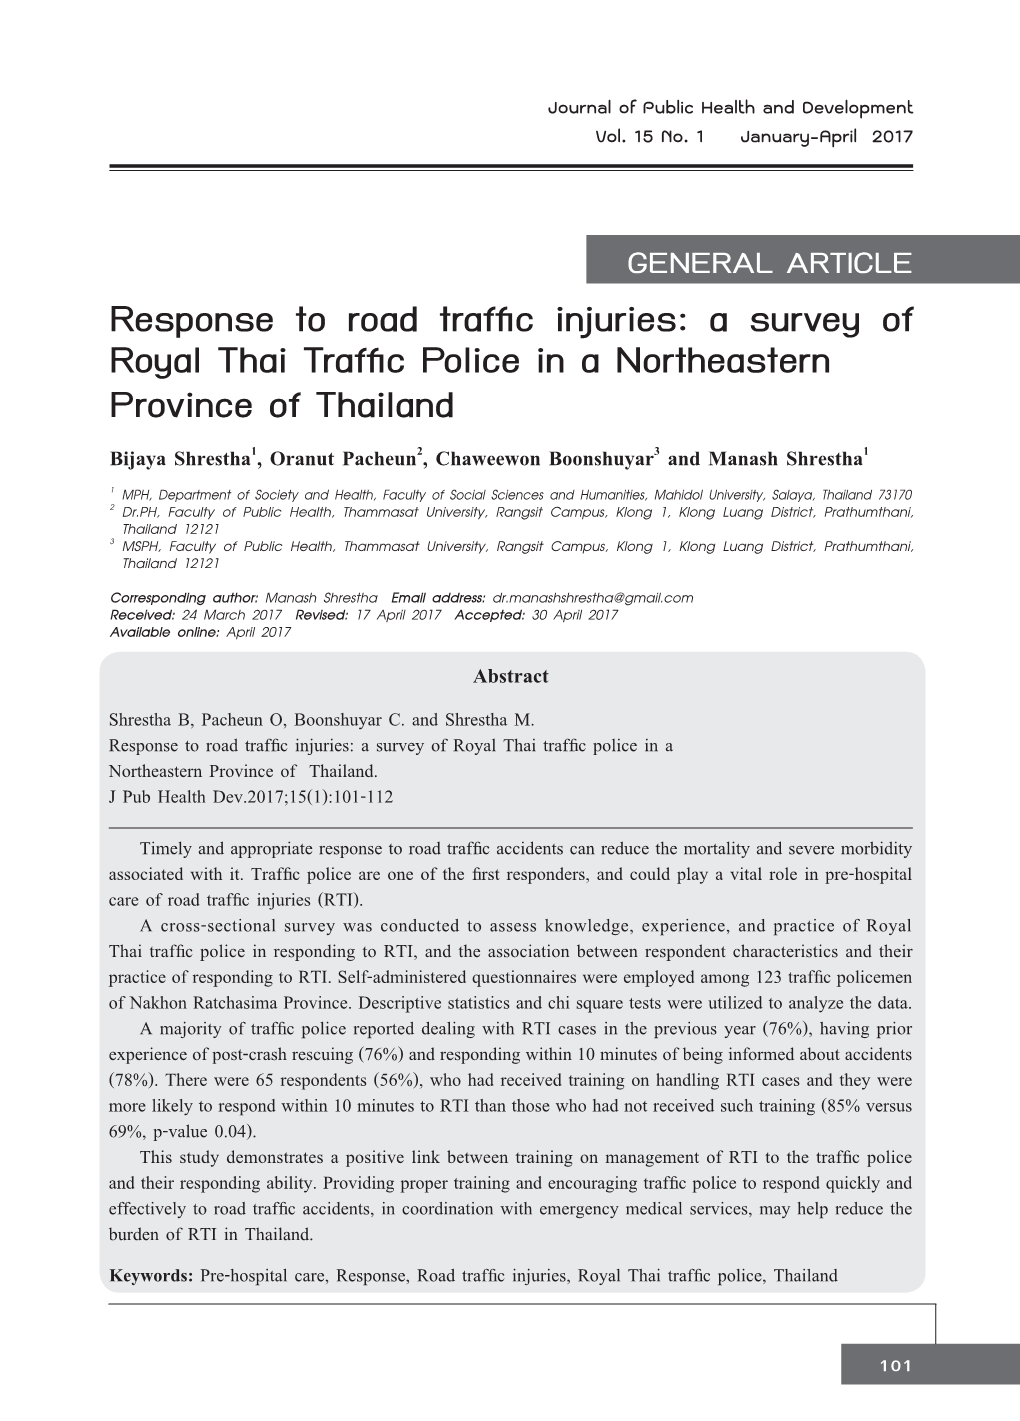 A Survey of Royal Thai Traffic Police in a Northeastern Province of Thailand